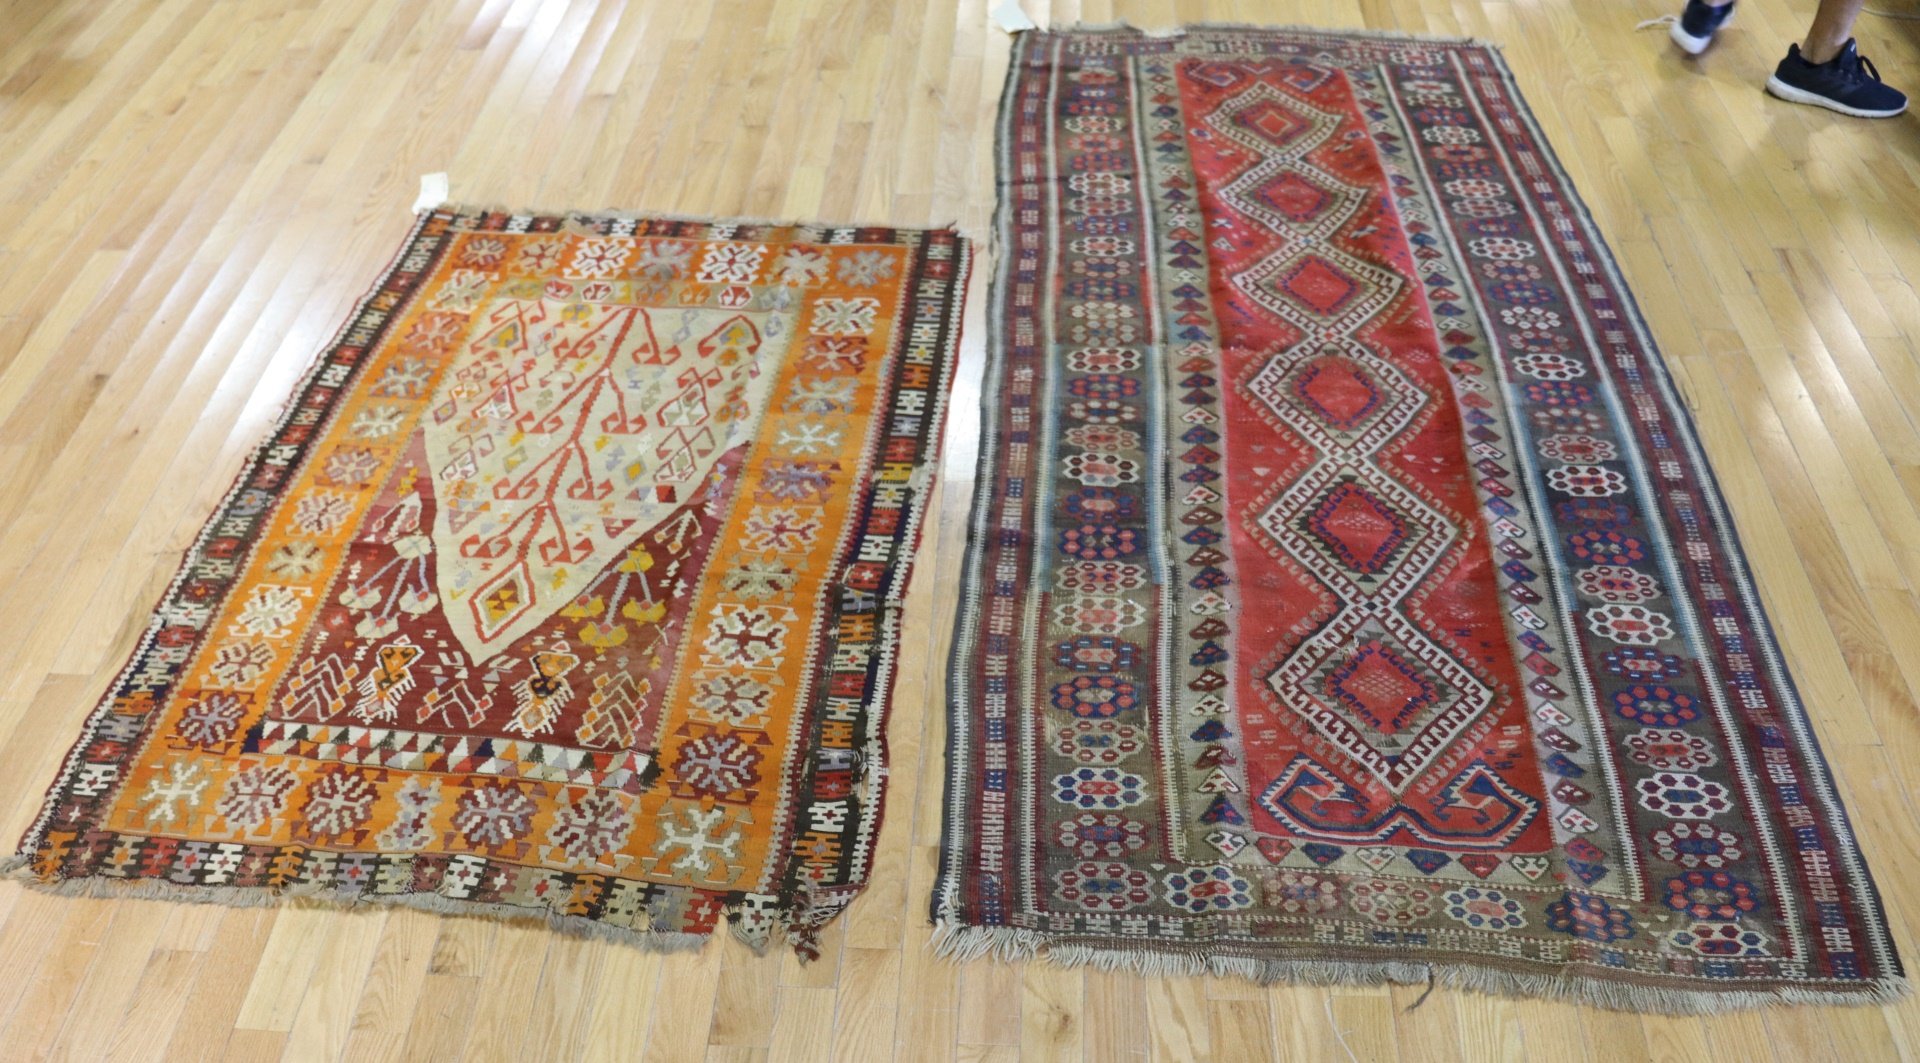 2 ANTIQUE AND FINELY HAND WOVEN 3b971d